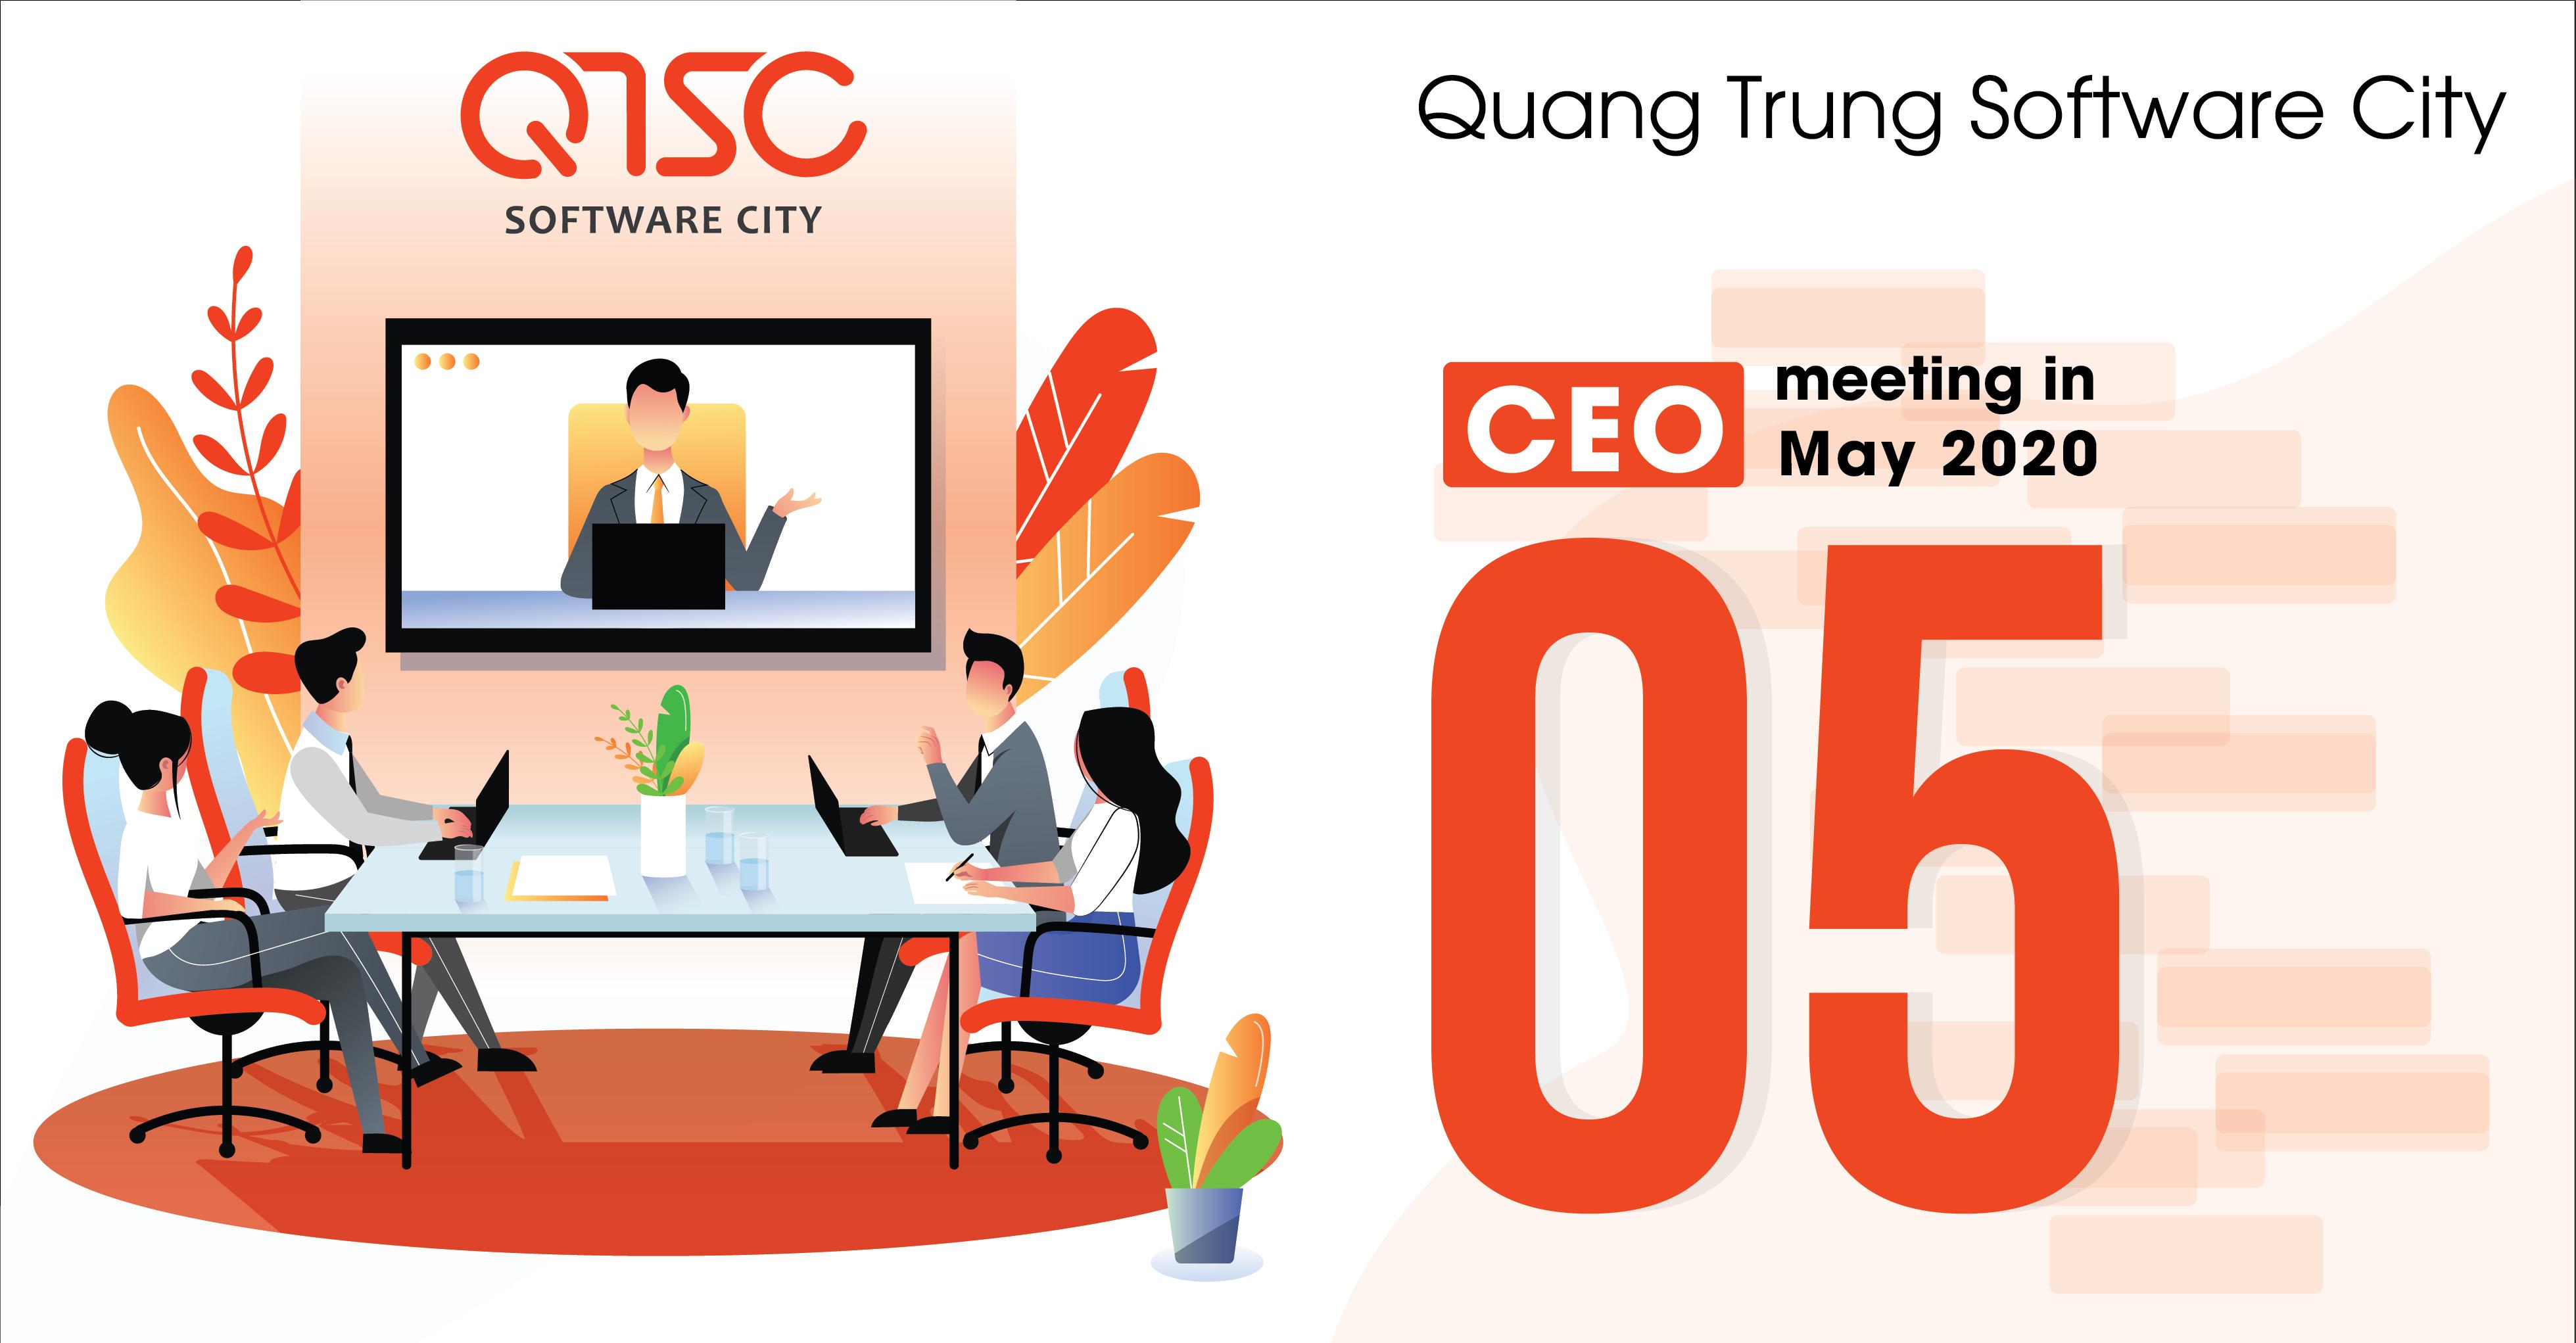 CEO meeting in May 2020